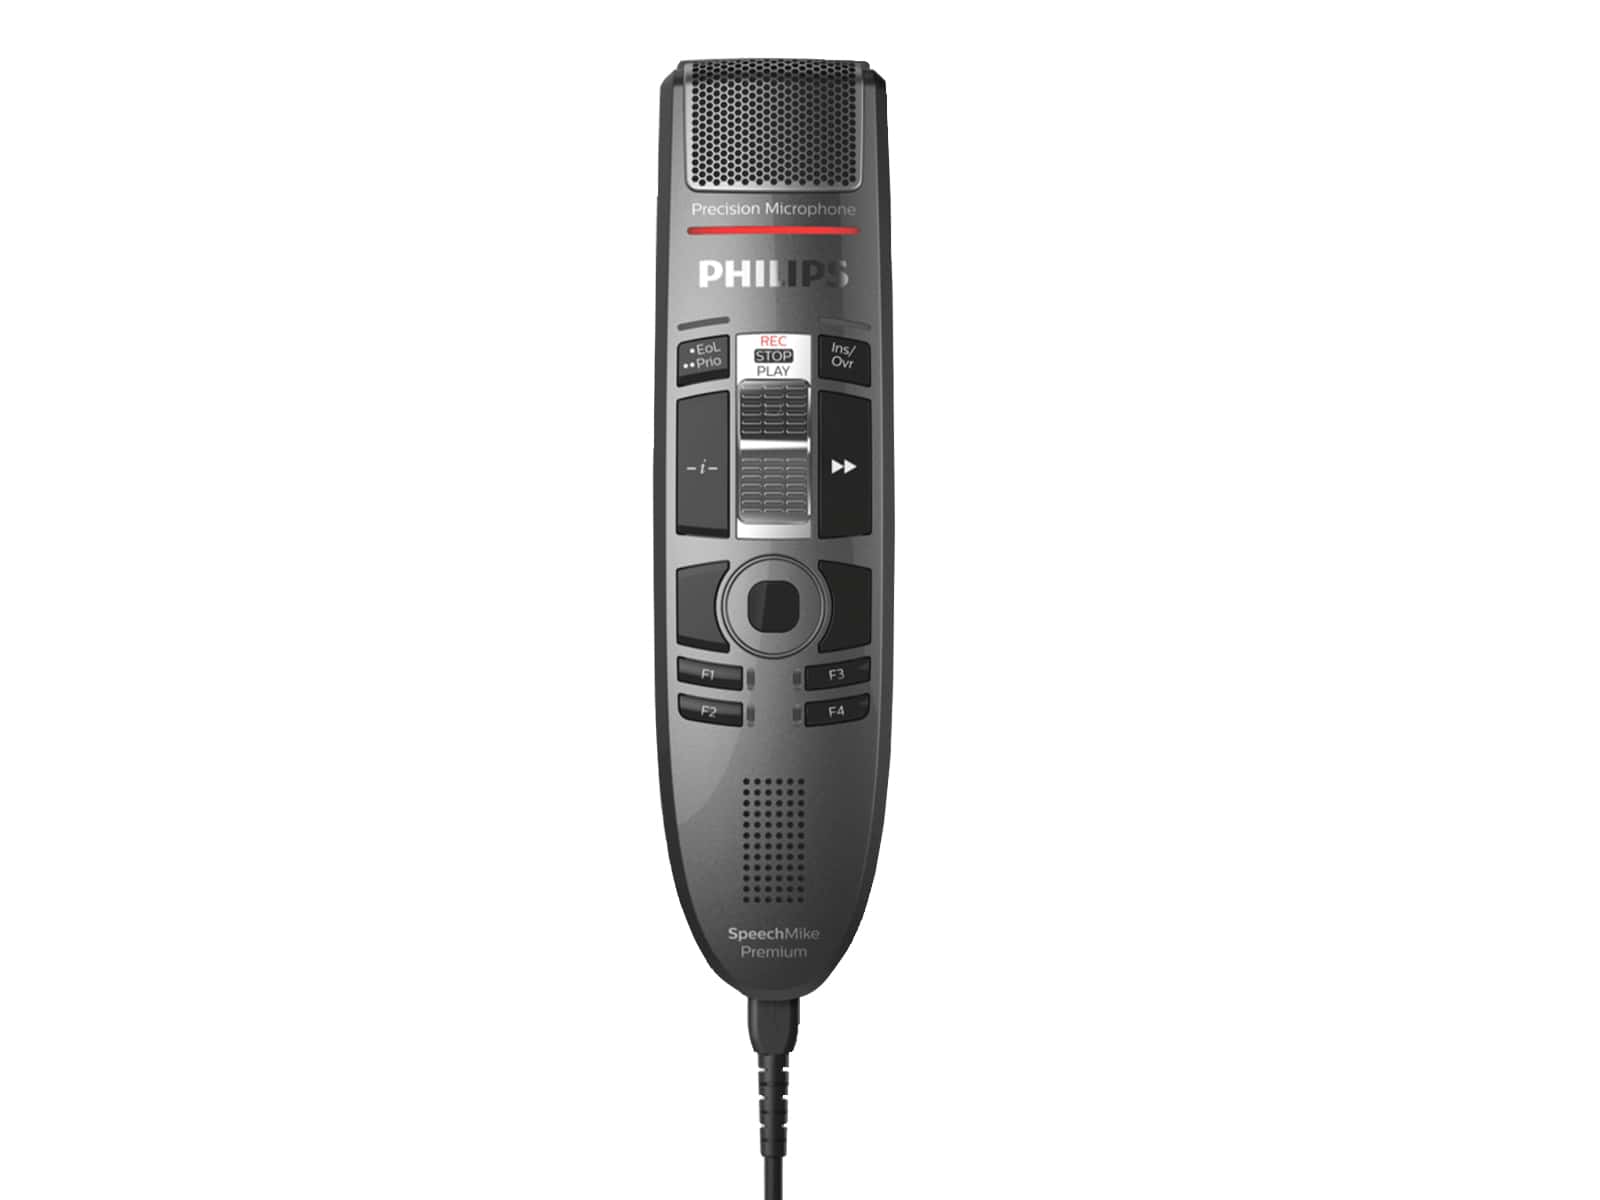 Philips SpeechMike Premium Touch Slide Switch Dictation Microphone with Bar-code Scanner (SMP3810) Monitors.com 